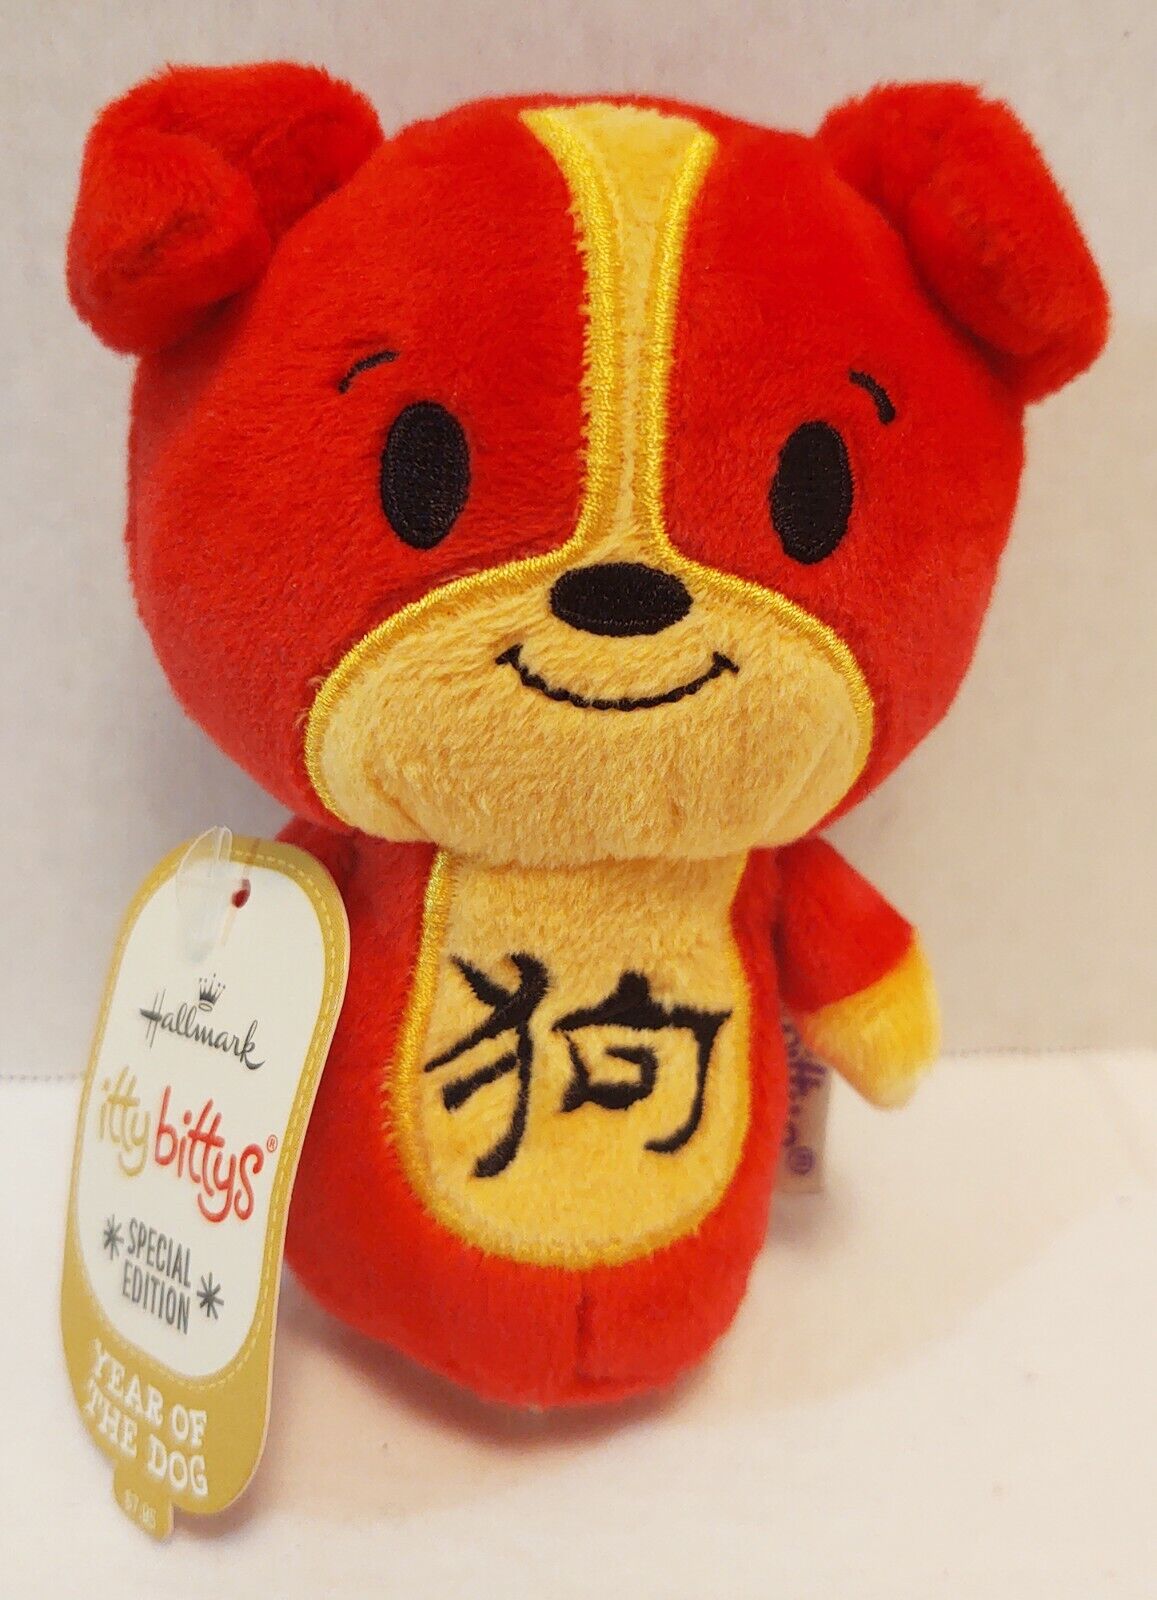 Hallmark Itty Bittys Special Edition Year of the Dog